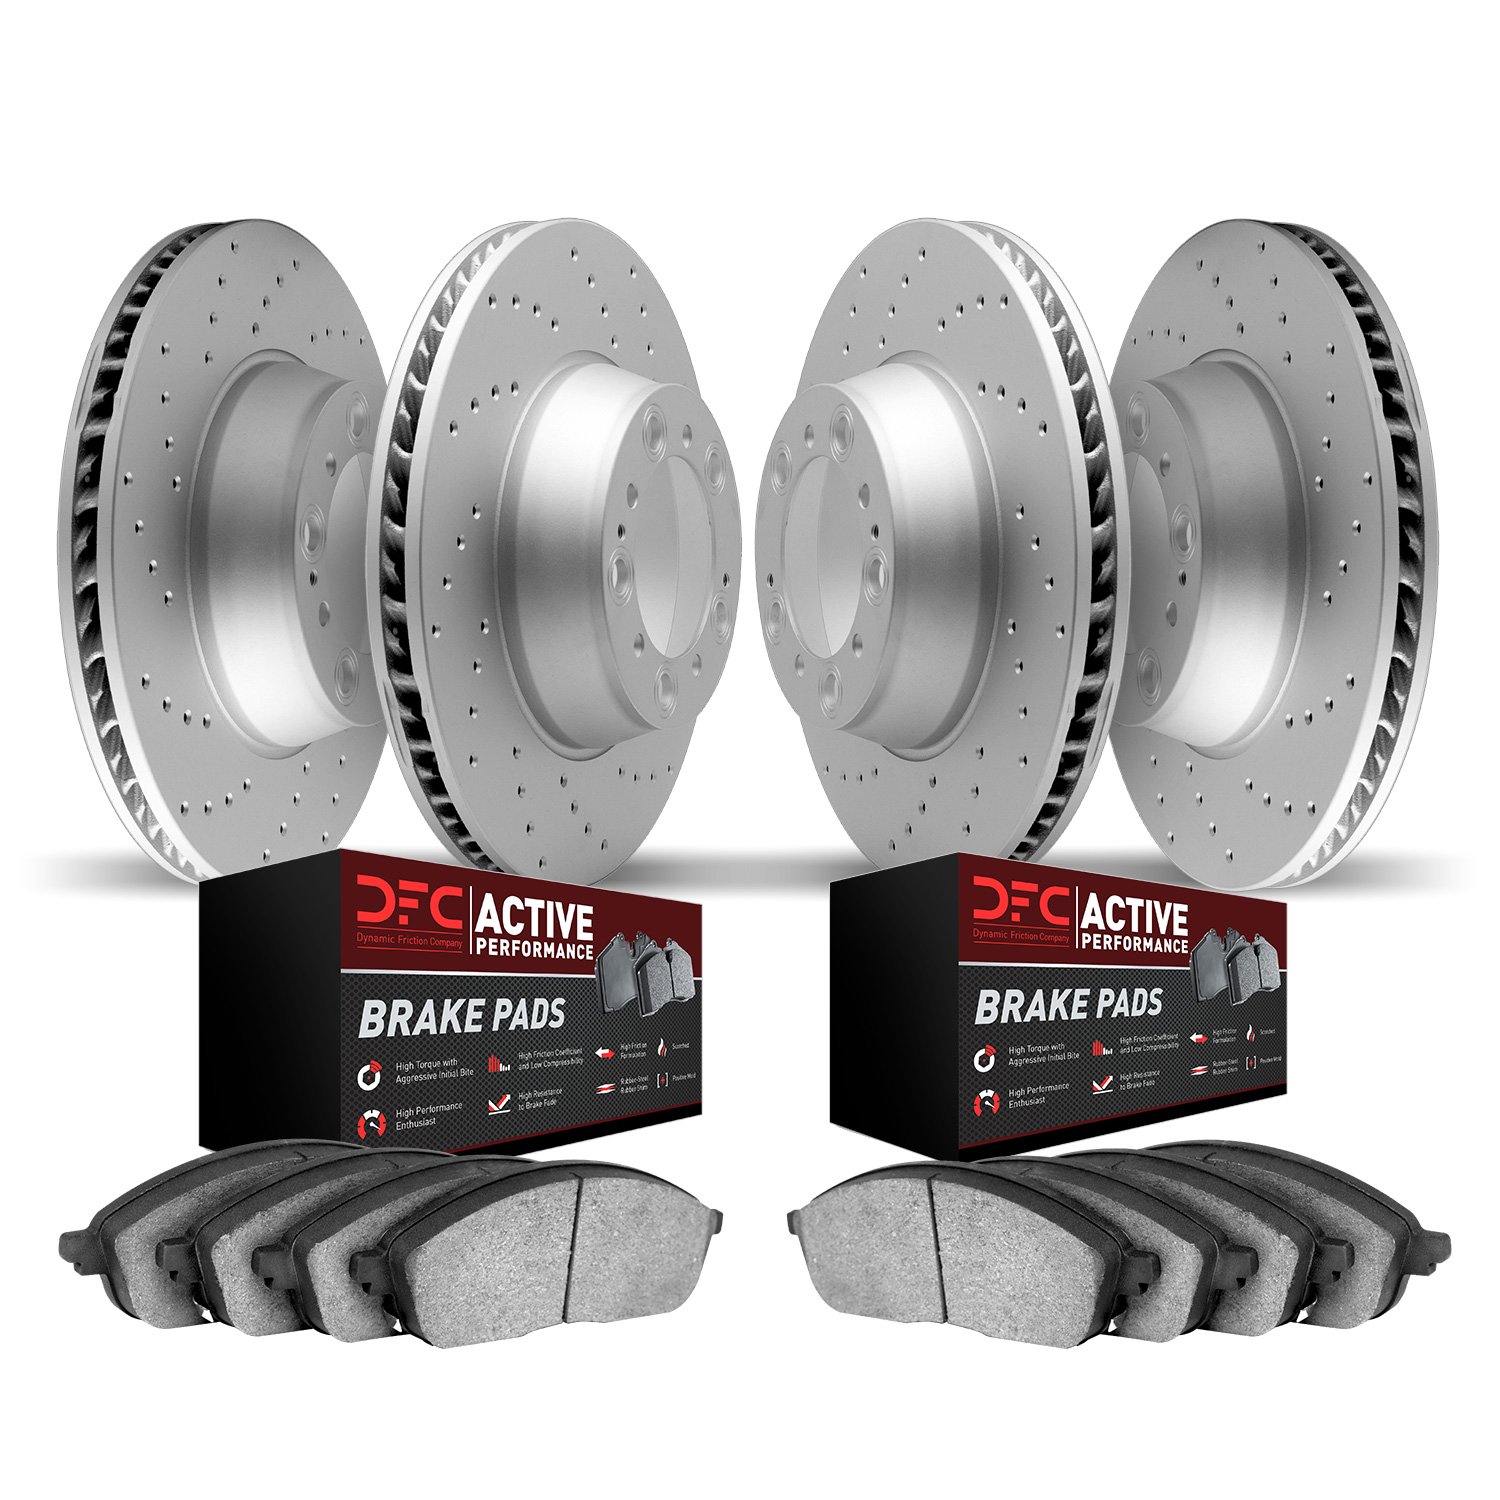 2704-52002 Geoperformance Drilled Brake Rotors with Active Performance Pads Kit, 2008-2009 GM, Position: Front and Rear